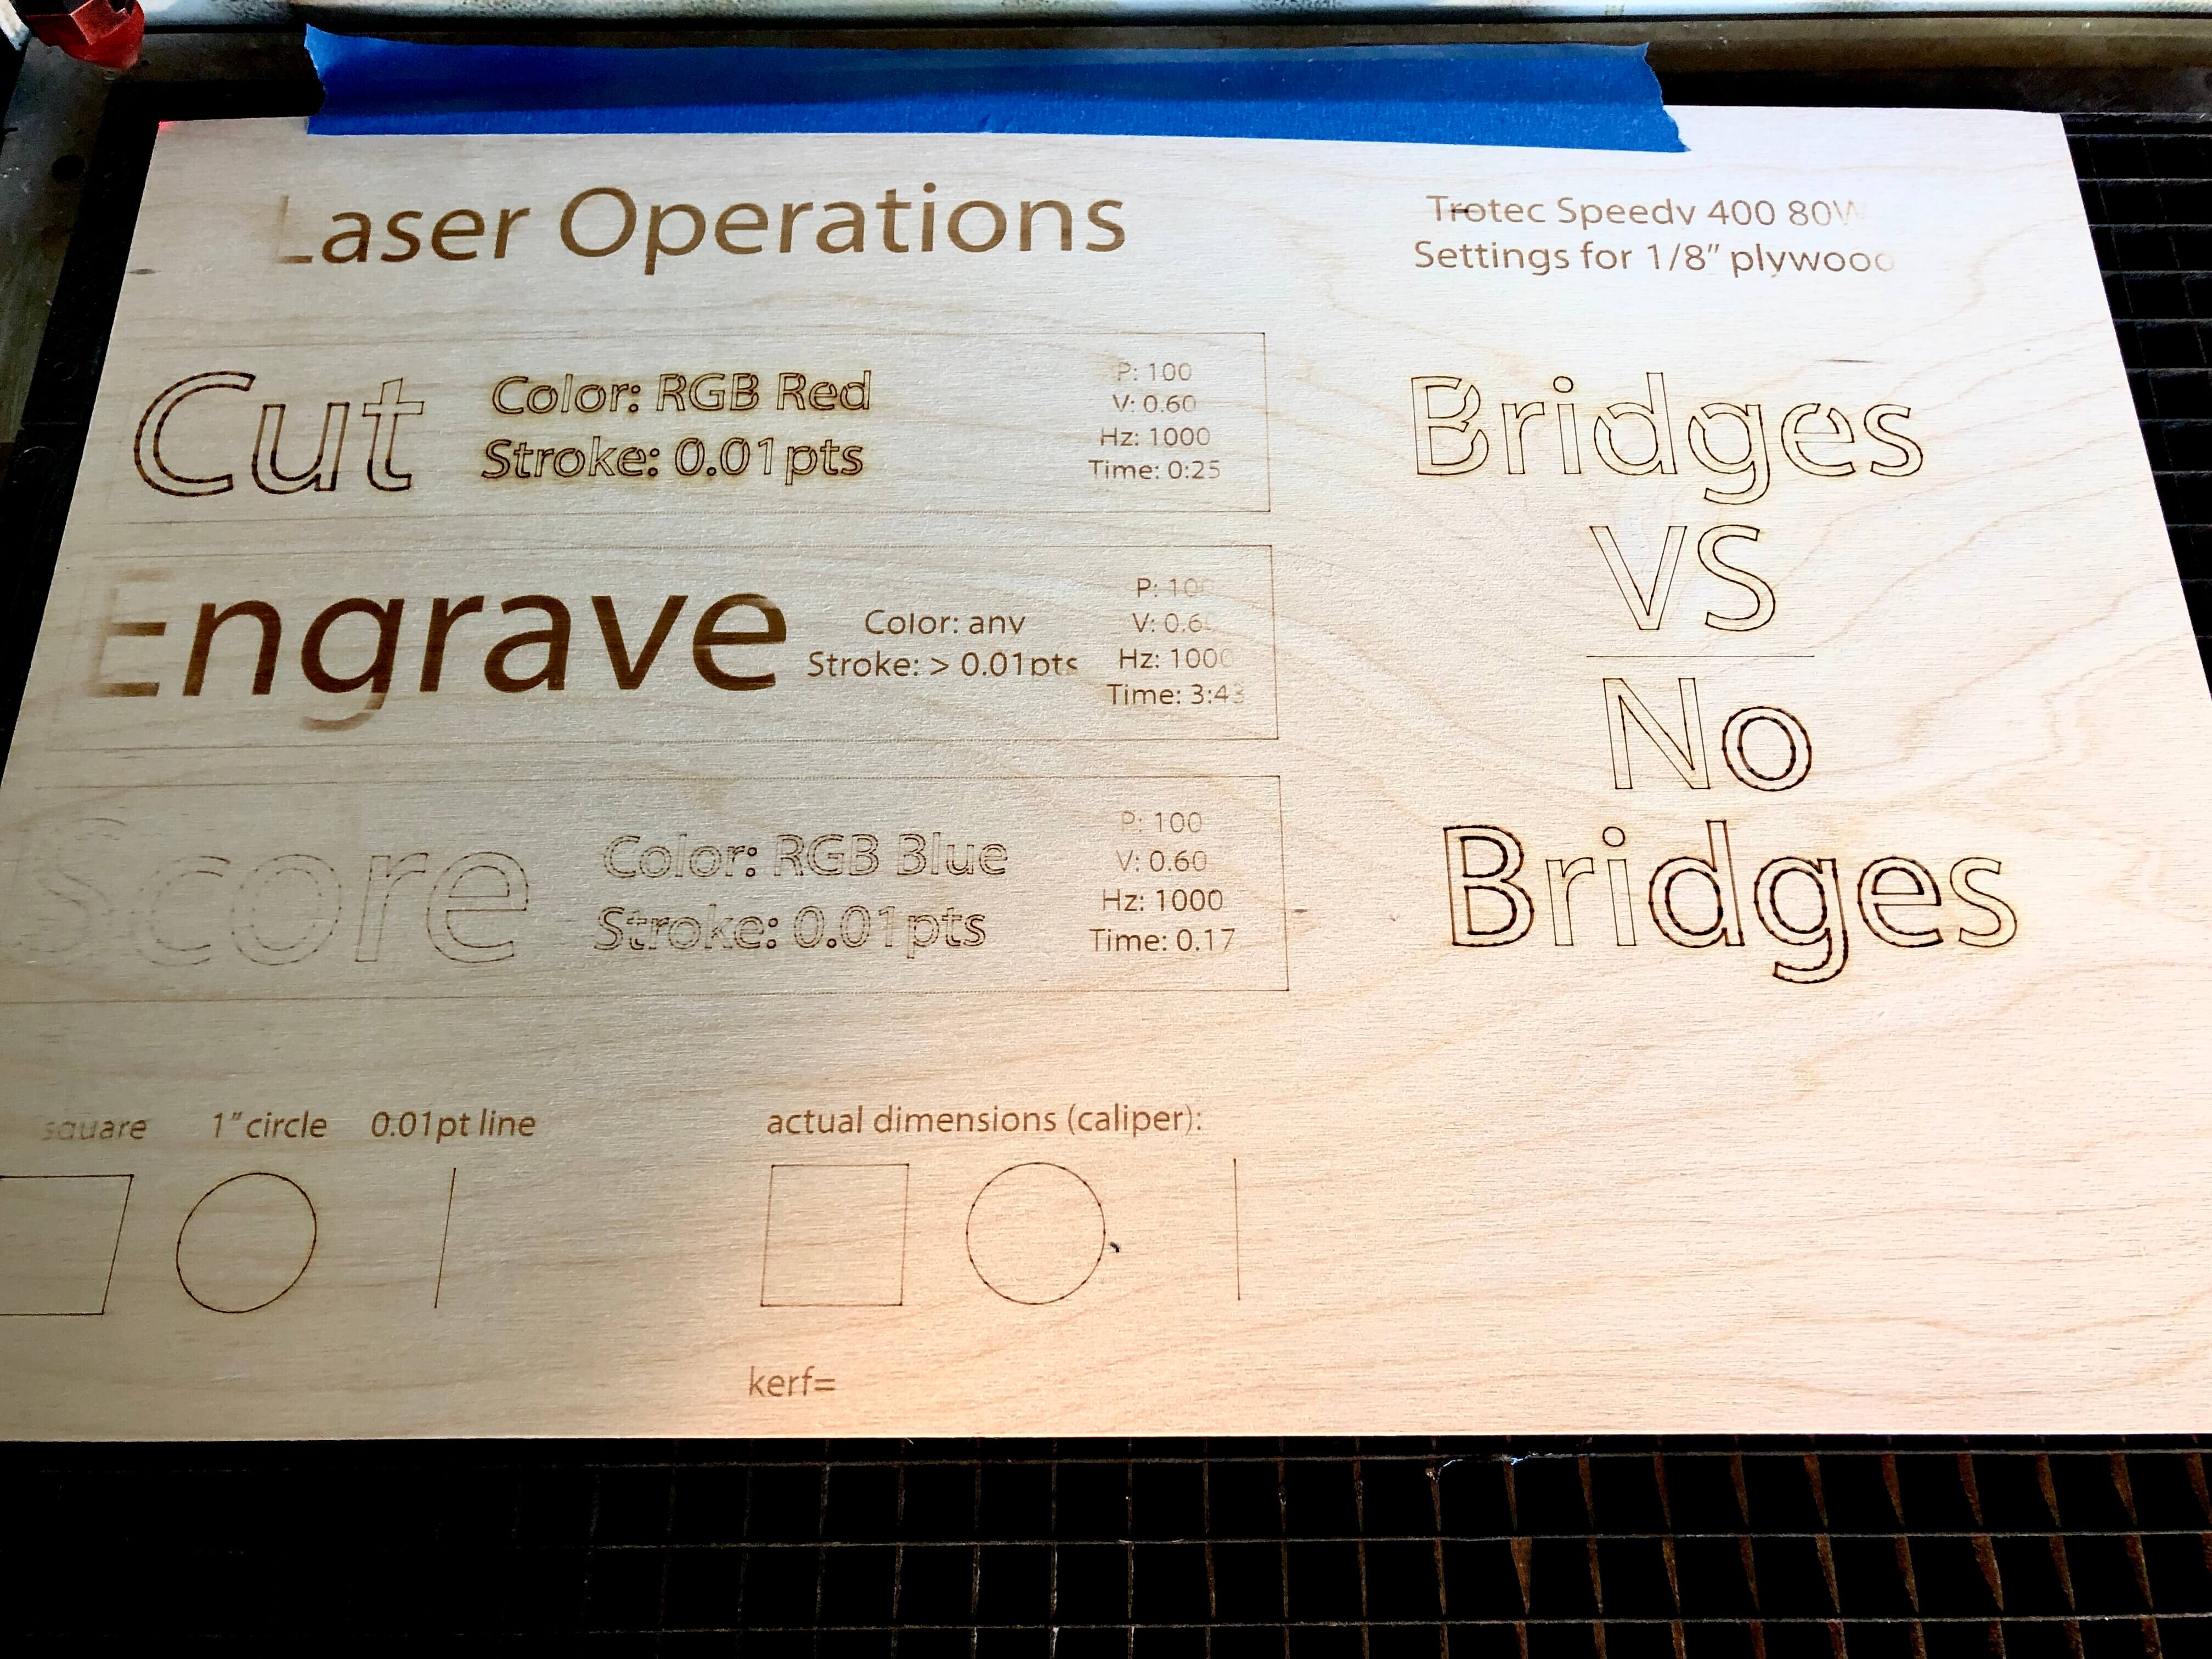 completed laser cutter job with problems